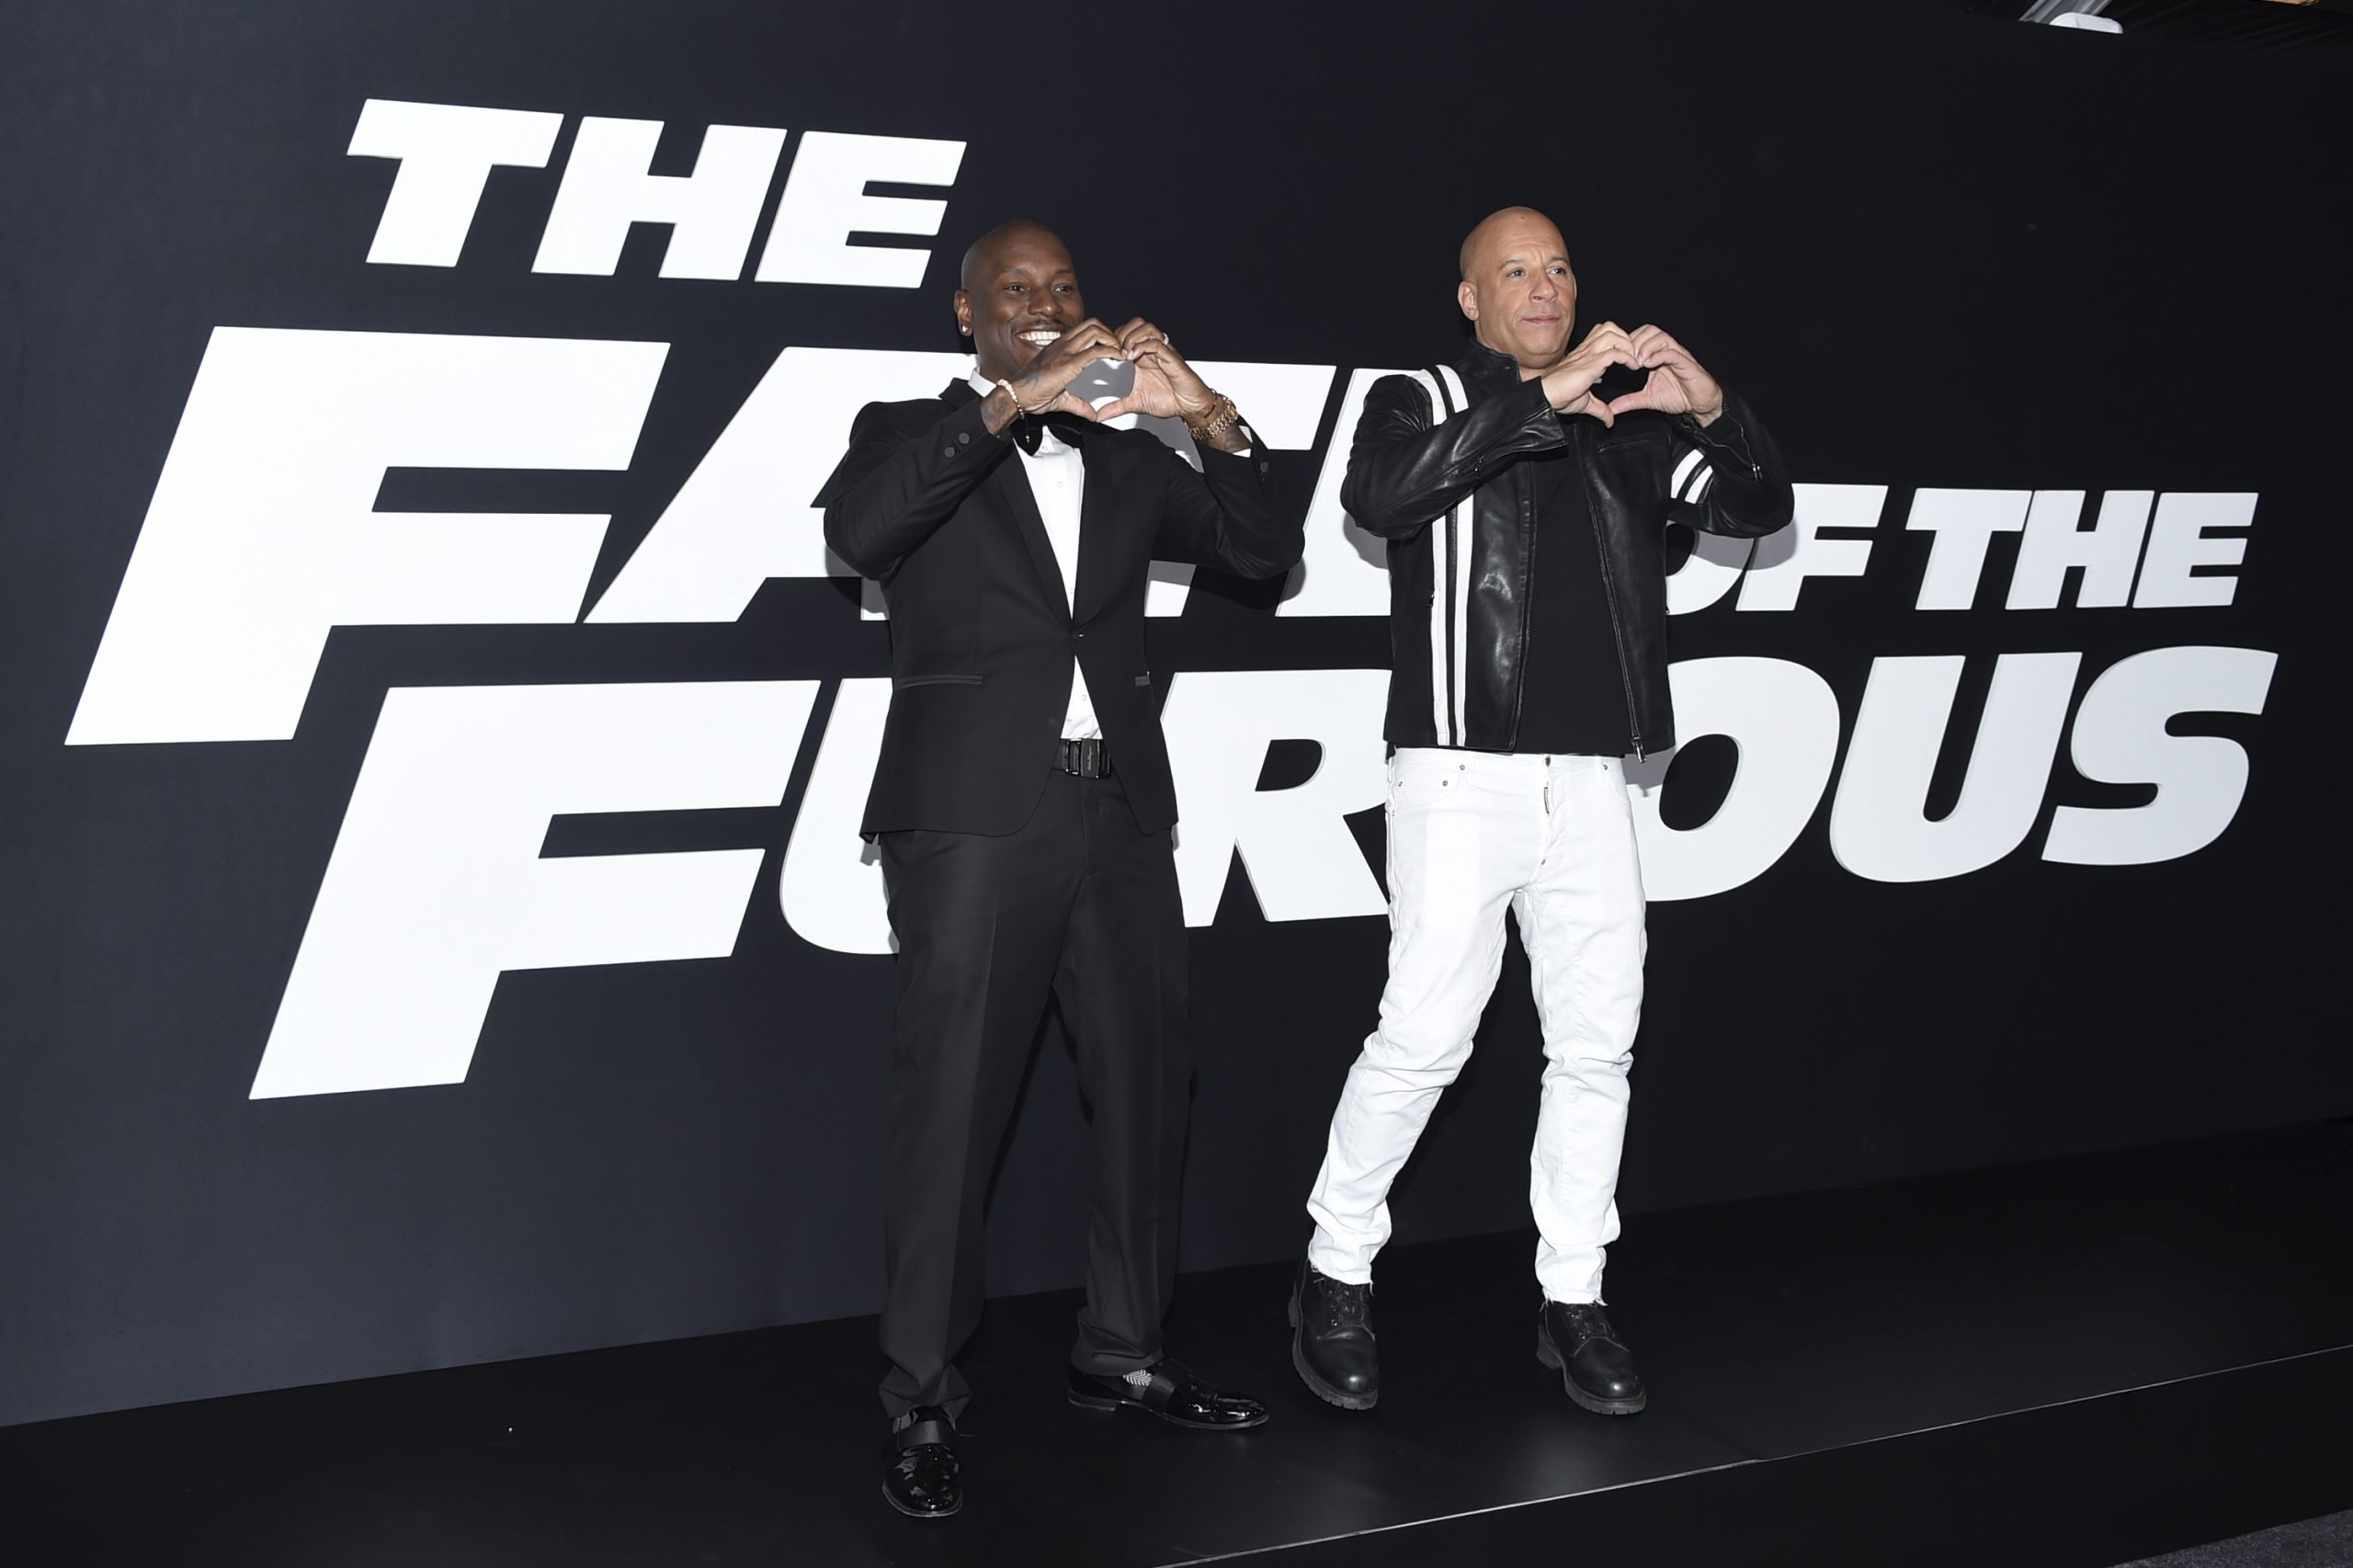 Tyrese Gibson, left, and Vin Diesel attend the world premiere of Universal Pictures' "The Fate of the Furious" at Radio City Music Hall on Saturday, April 8, 2017, in New York. (Photo by Evan Agostini/Invision/AP)